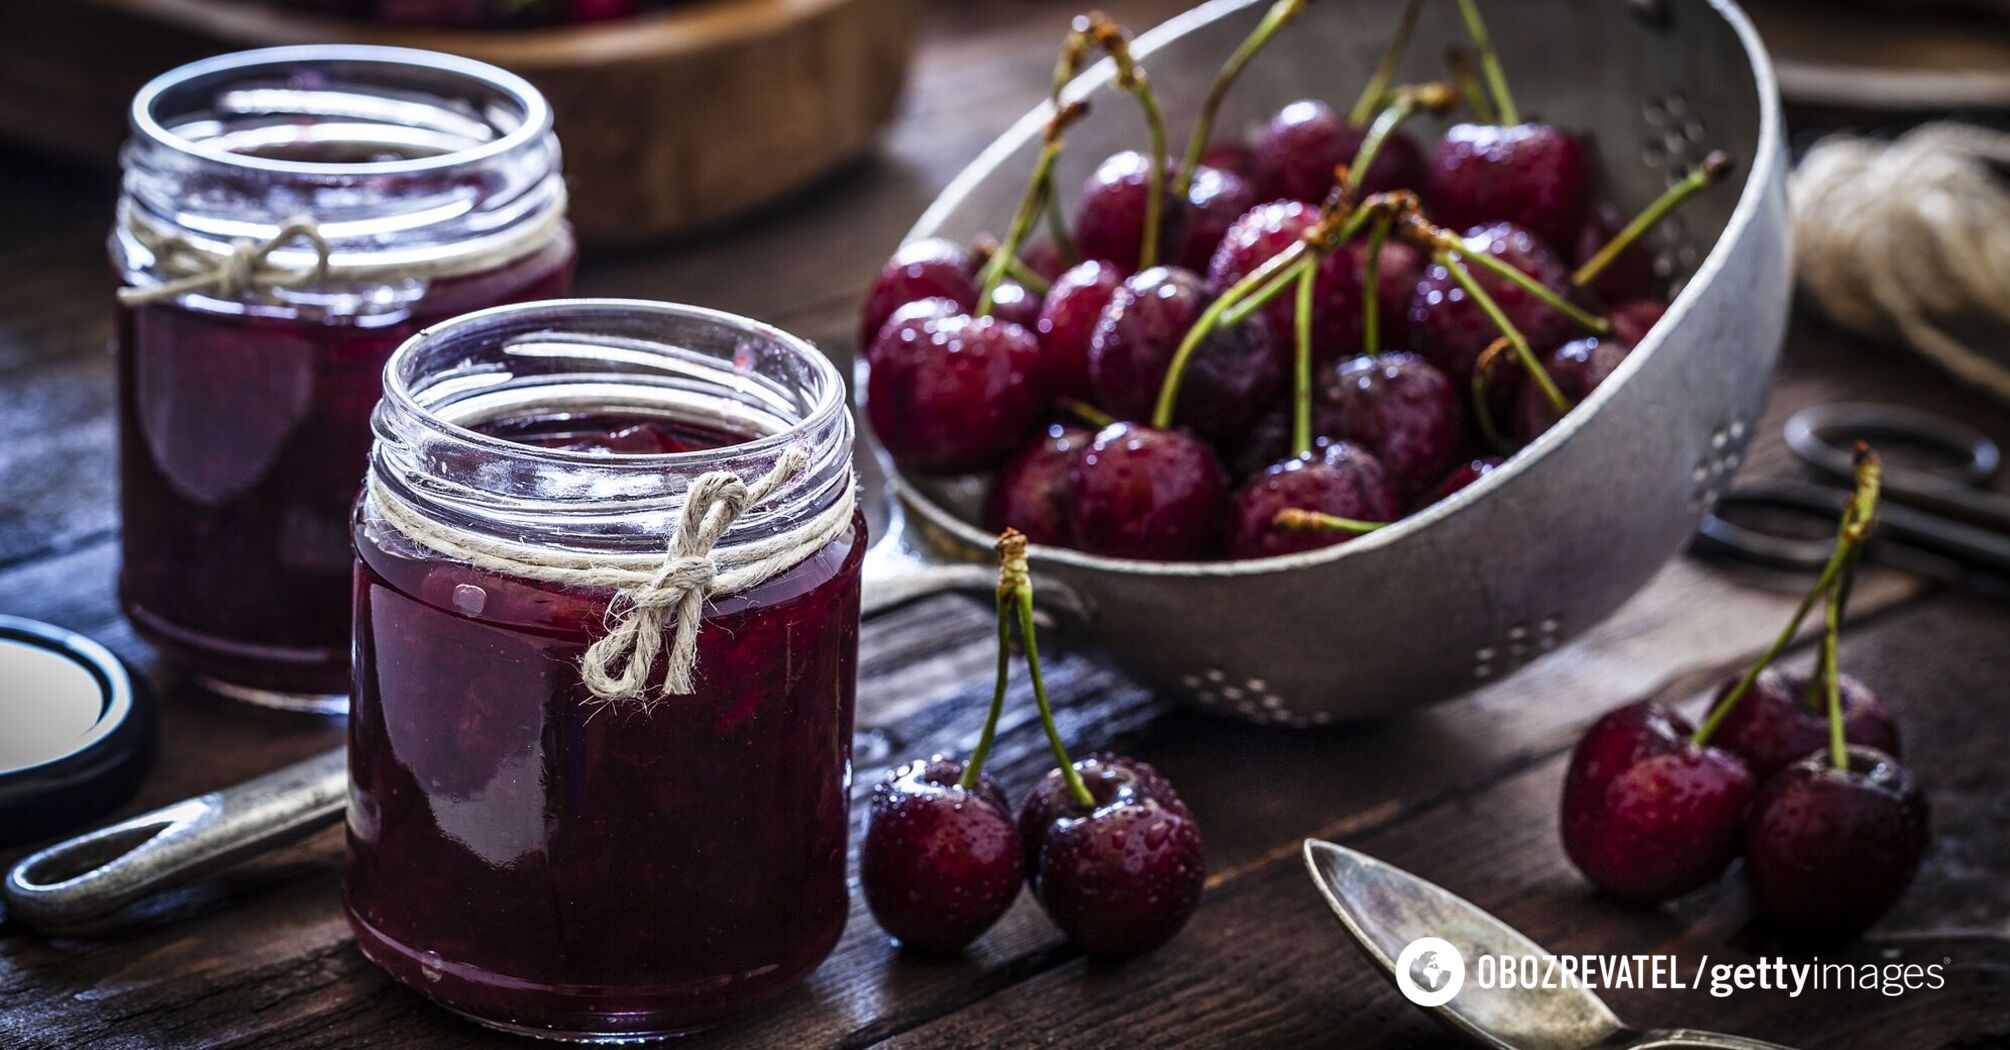 How to make delicious cherry jam